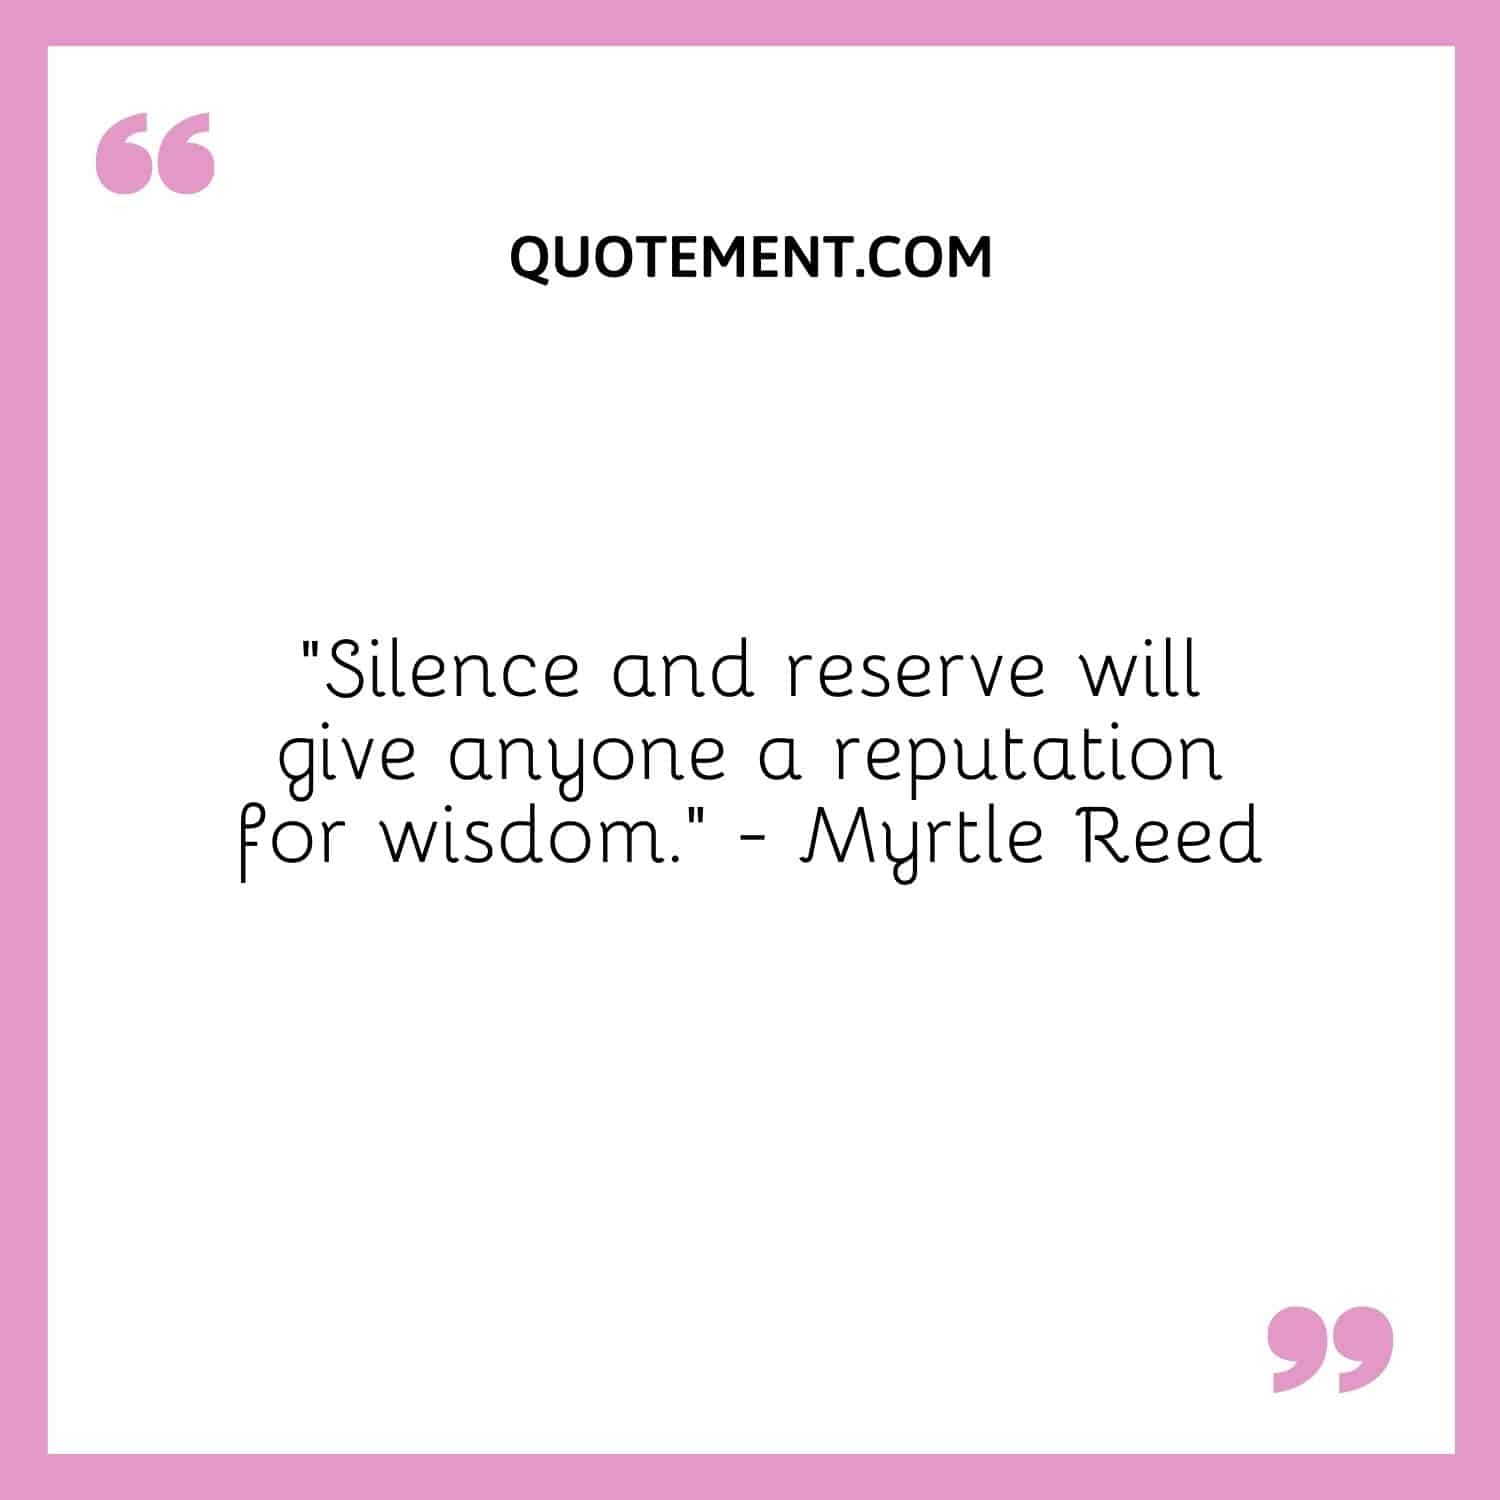 “Silence and reserve will give anyone a reputation for wisdom.” — Myrtle Reed